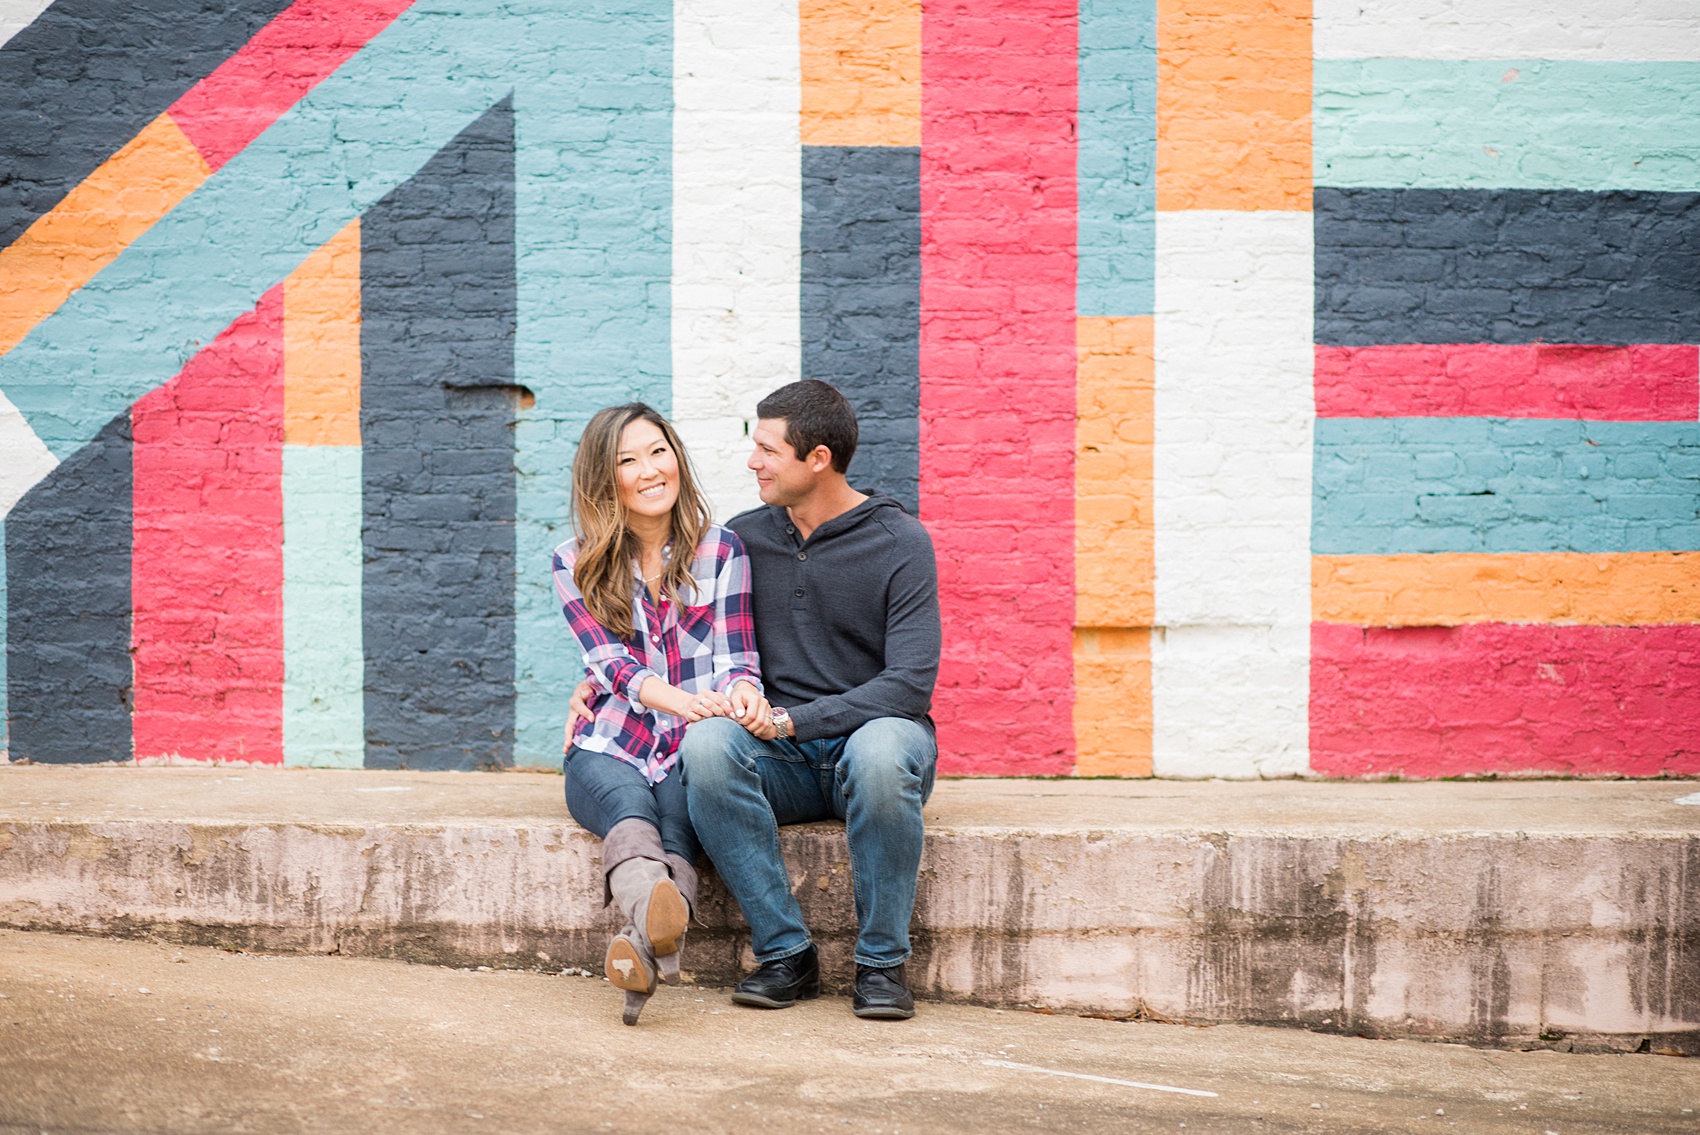 Colorful photos taken during a fall, autumn season engagement anniversary session. Images taken by Mikkel Paige Photography in an urban city setting. Click through to see more from this vibrant, unique photography session with lots of fun colors, street art murals and ideas for outfits!